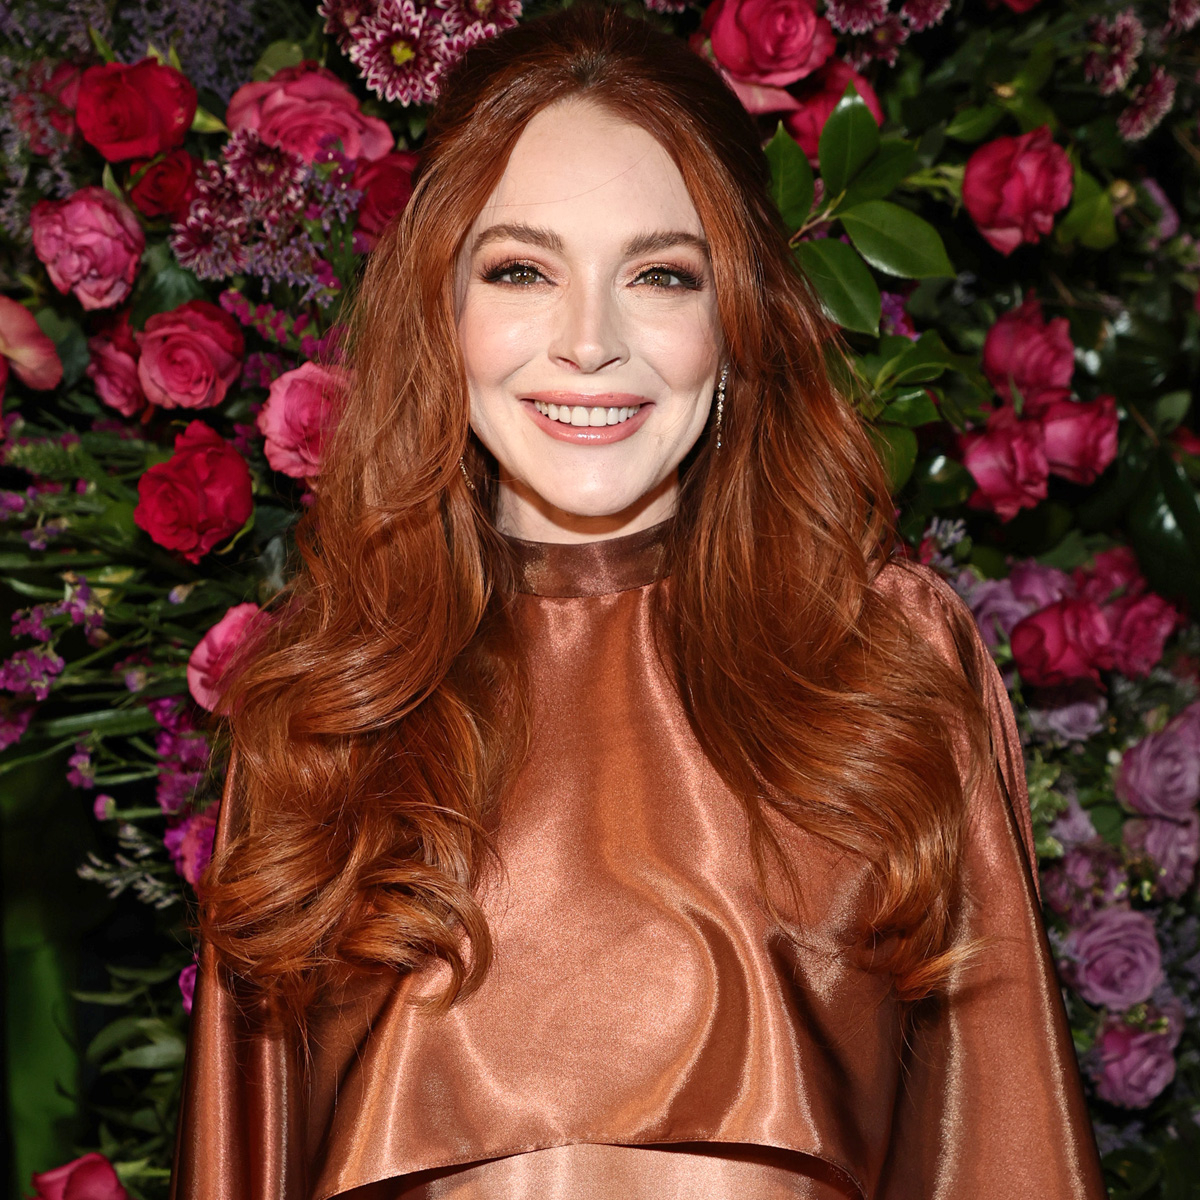 Lindsay Lohan Shares Postpartum Photo With Message on Loving Her Body